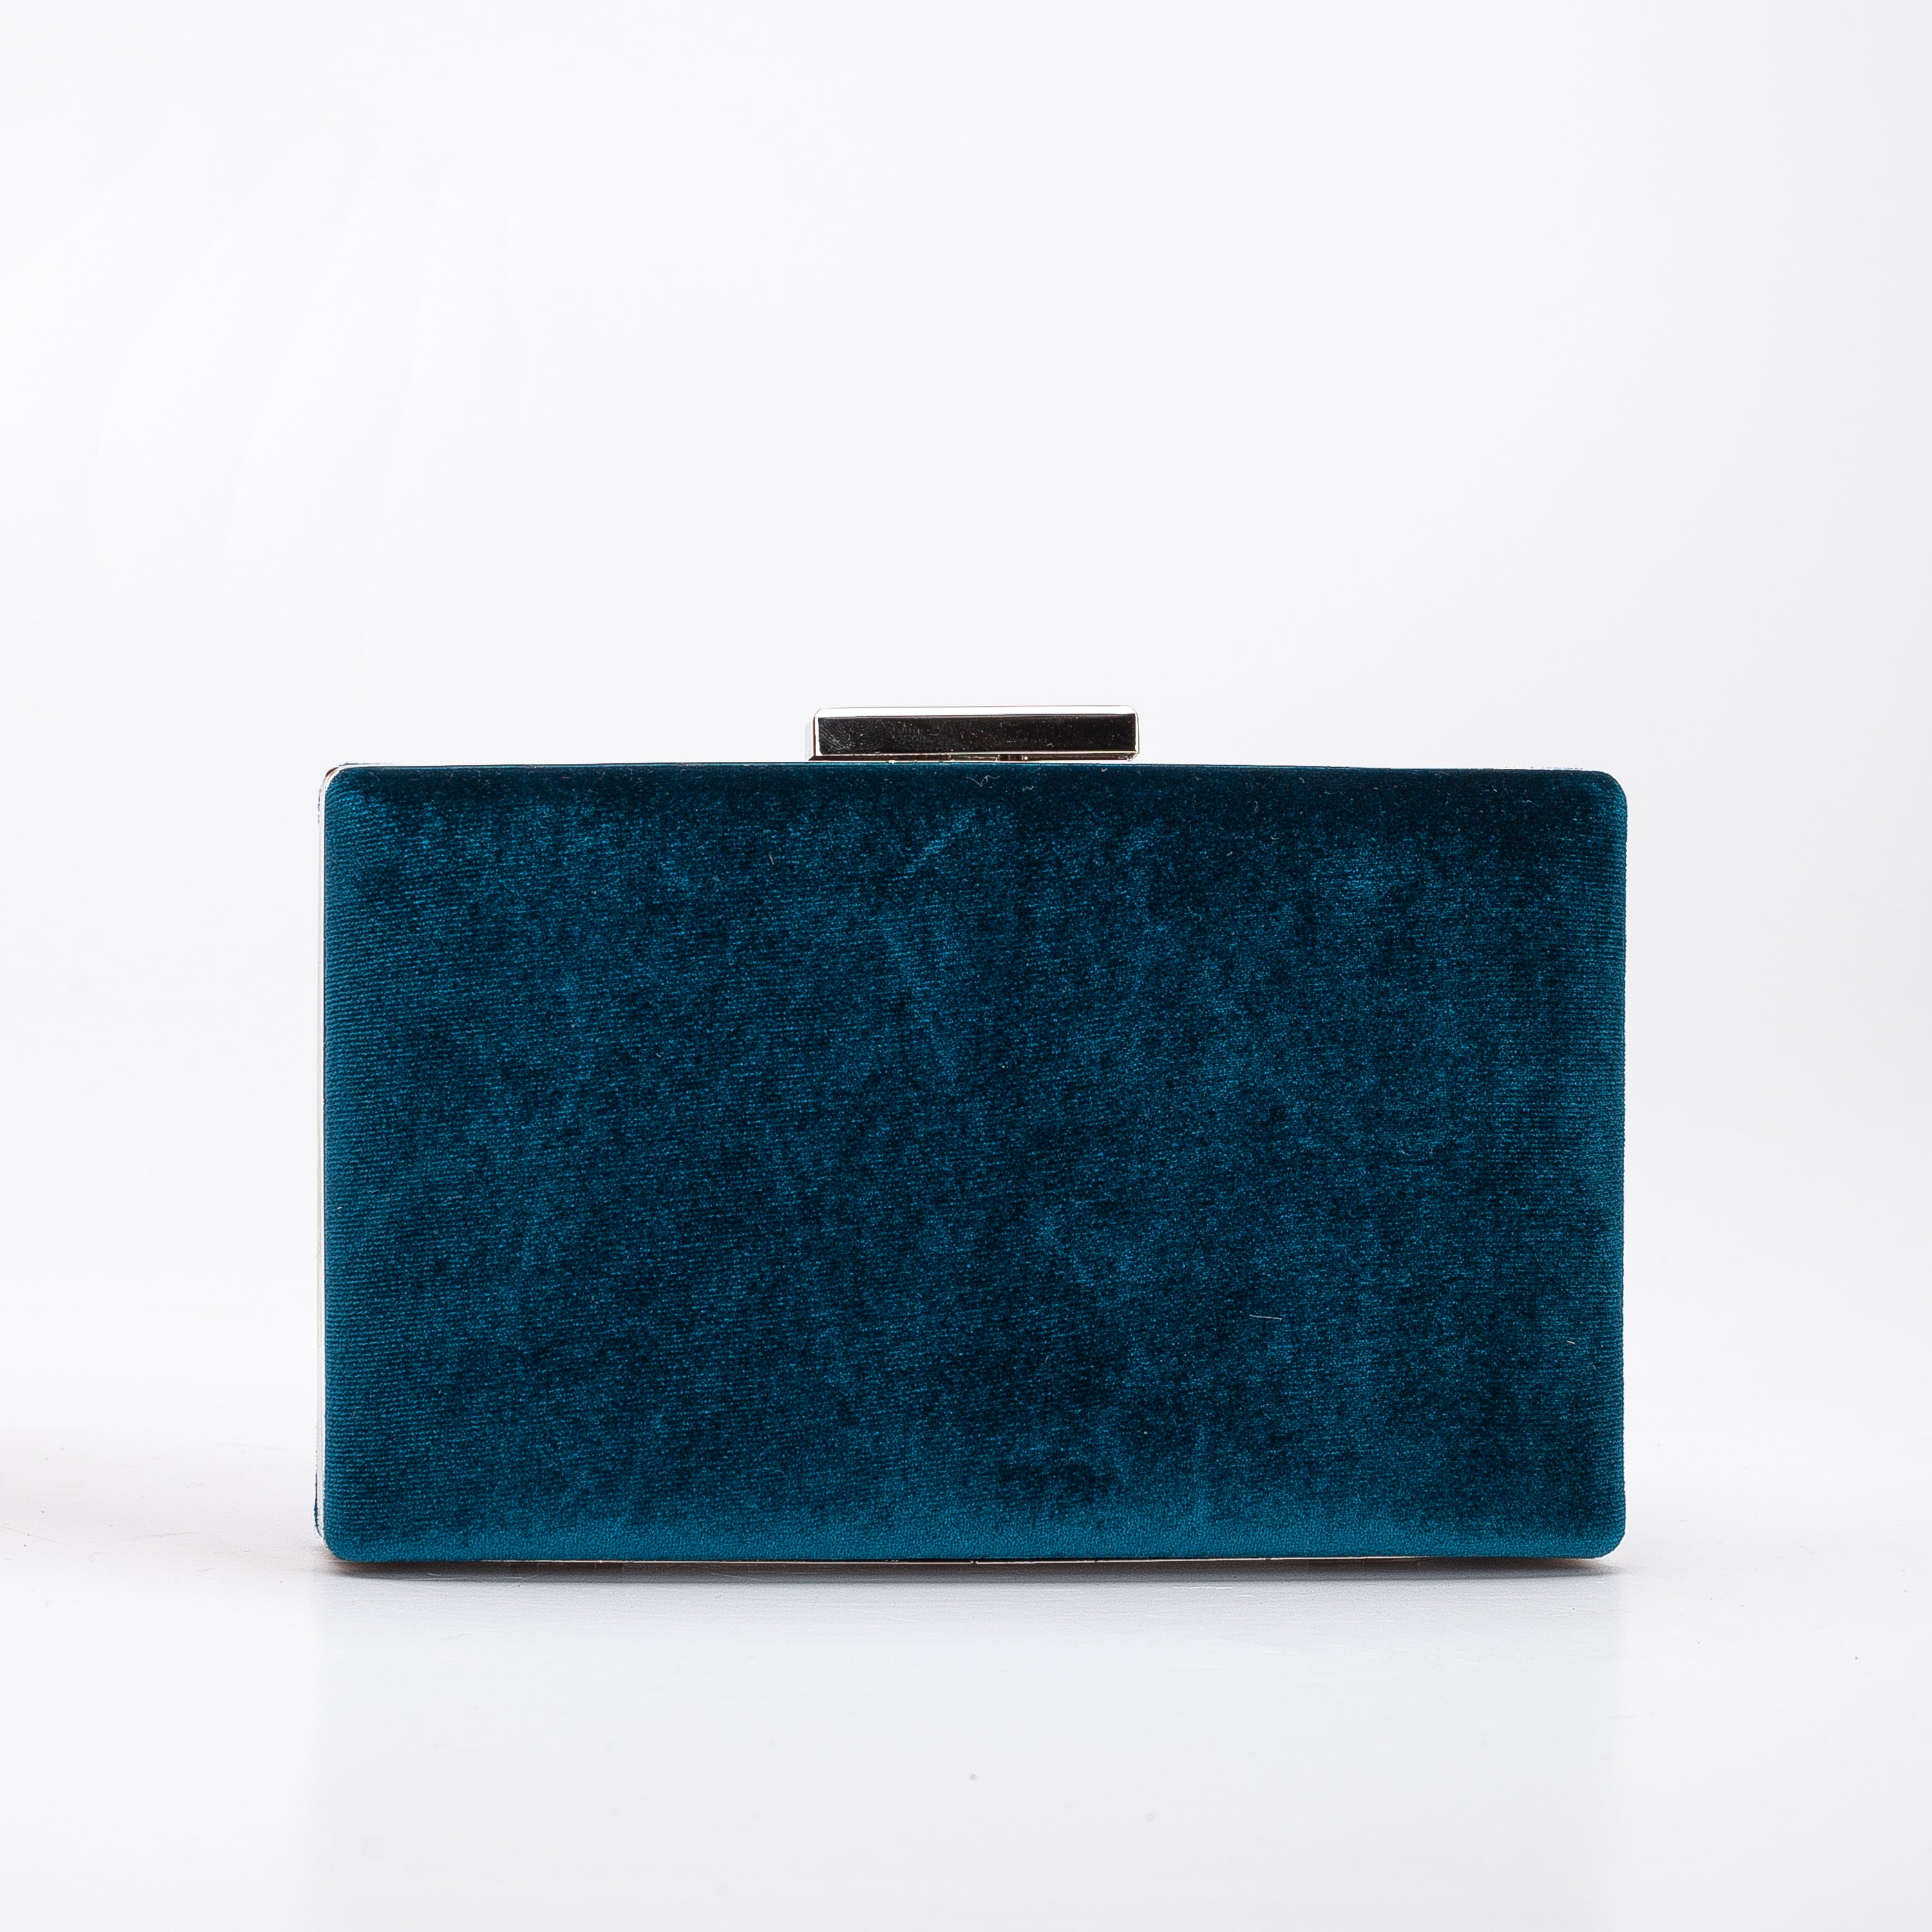 Blue Clear Crystal Gold Evening Clutch Purse - Youarrived